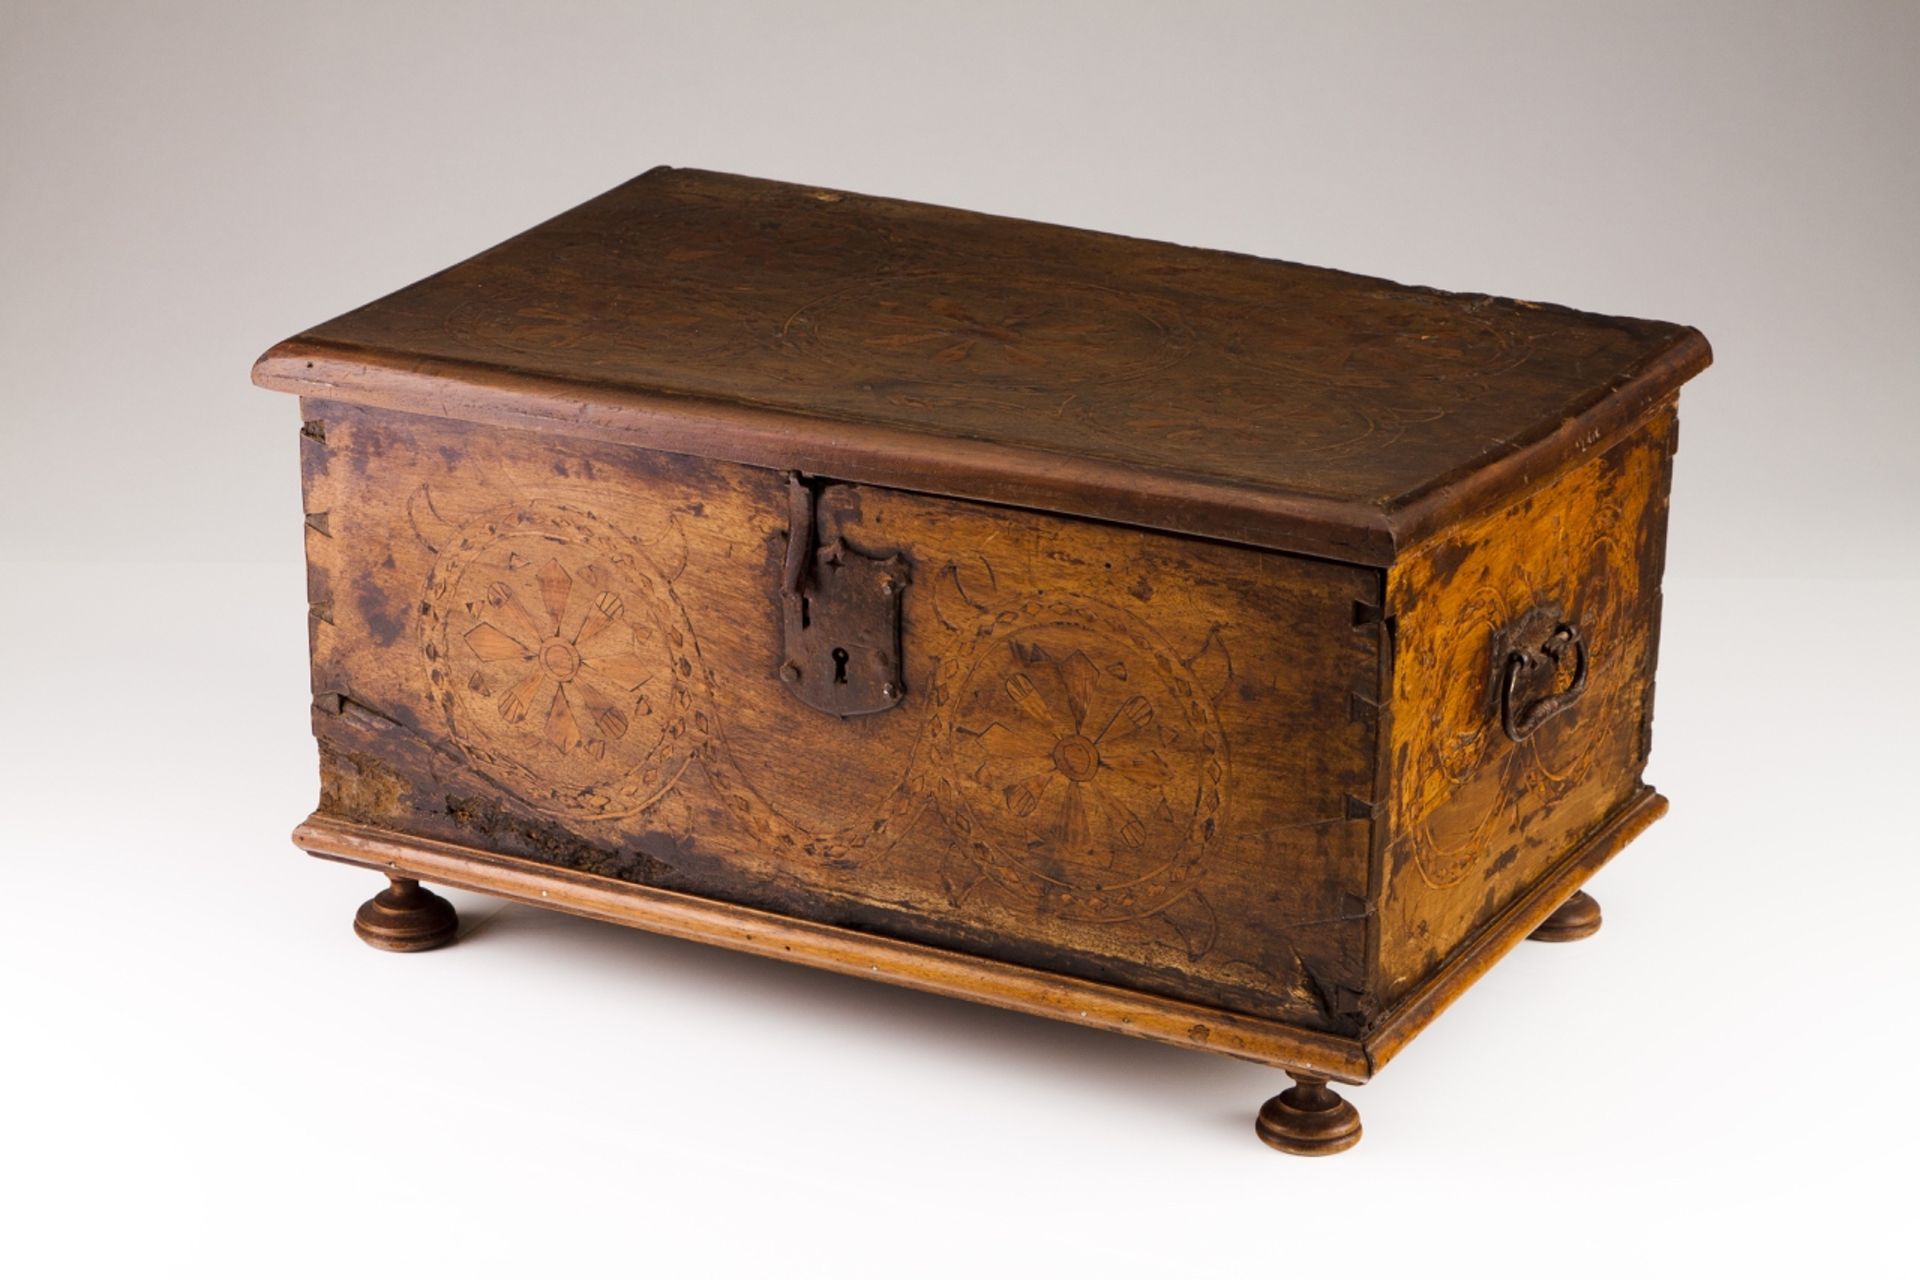 A late 17th, early 18th century coffer
Tortoiseshell veneered wood, engraved silver mounts
Gilt